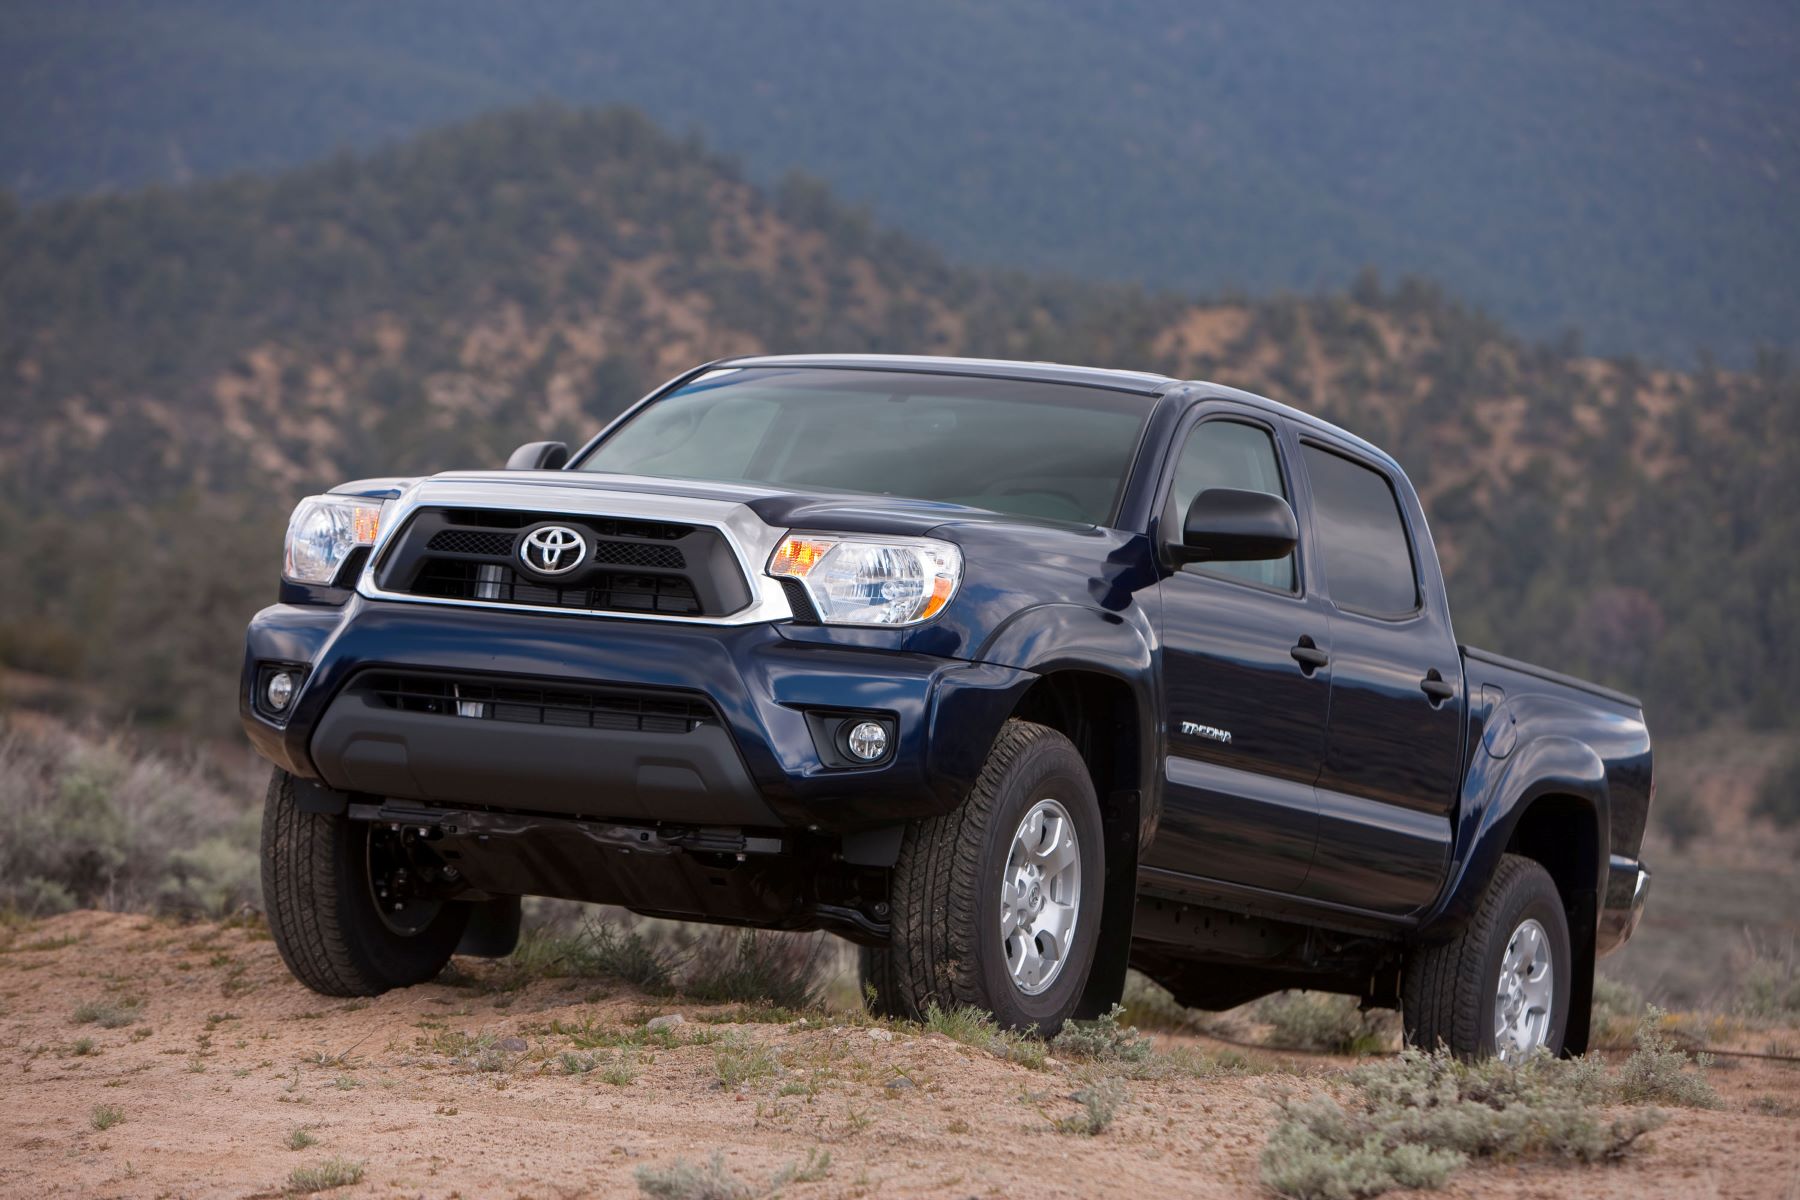 2012, 2013, 2014, and 2015 Toyota Tacoma midsize pickup truck model years from the vehicle's 2nd generation